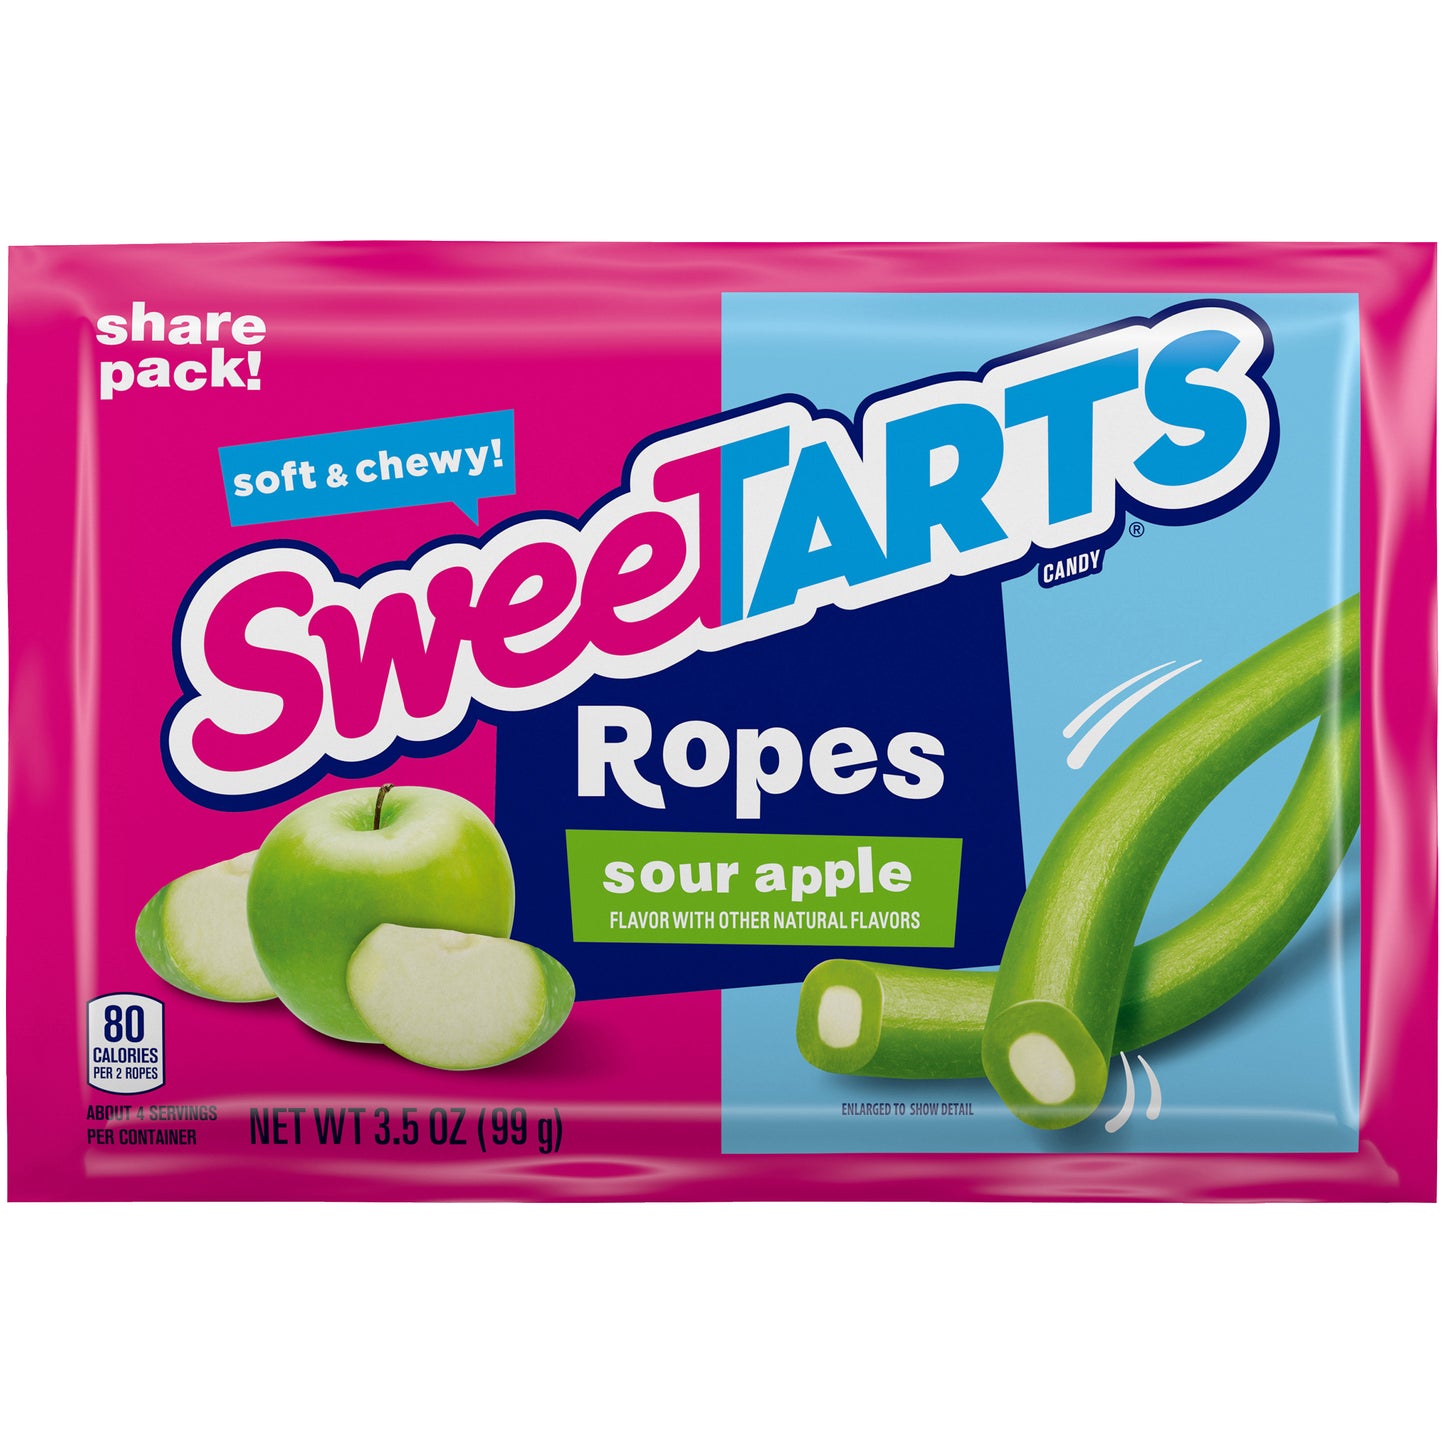 Sweetarts Ropes Sour Apple Share Size3.5oz 12ct